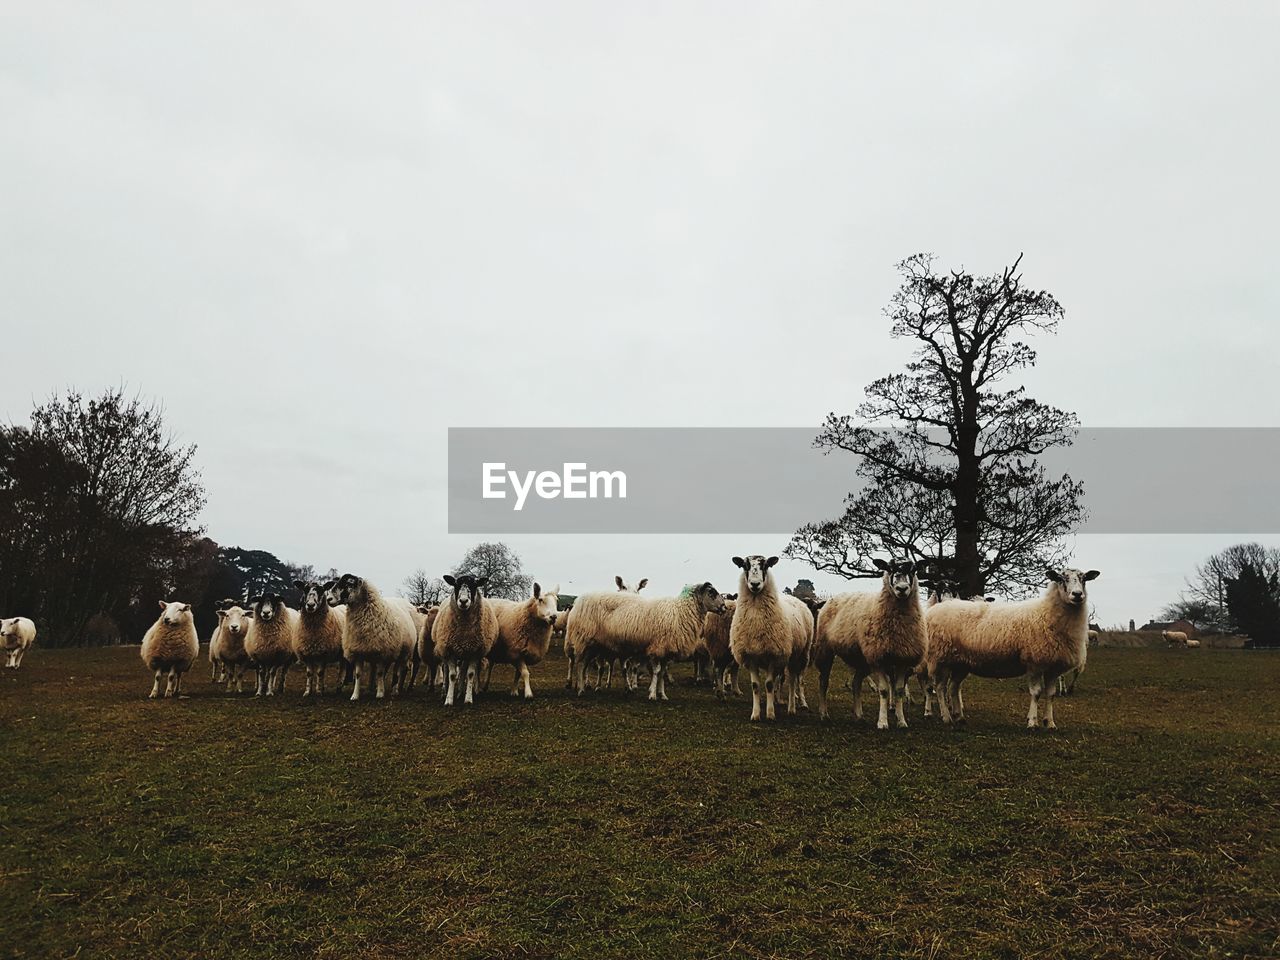 Sheep standing on field against clear sky